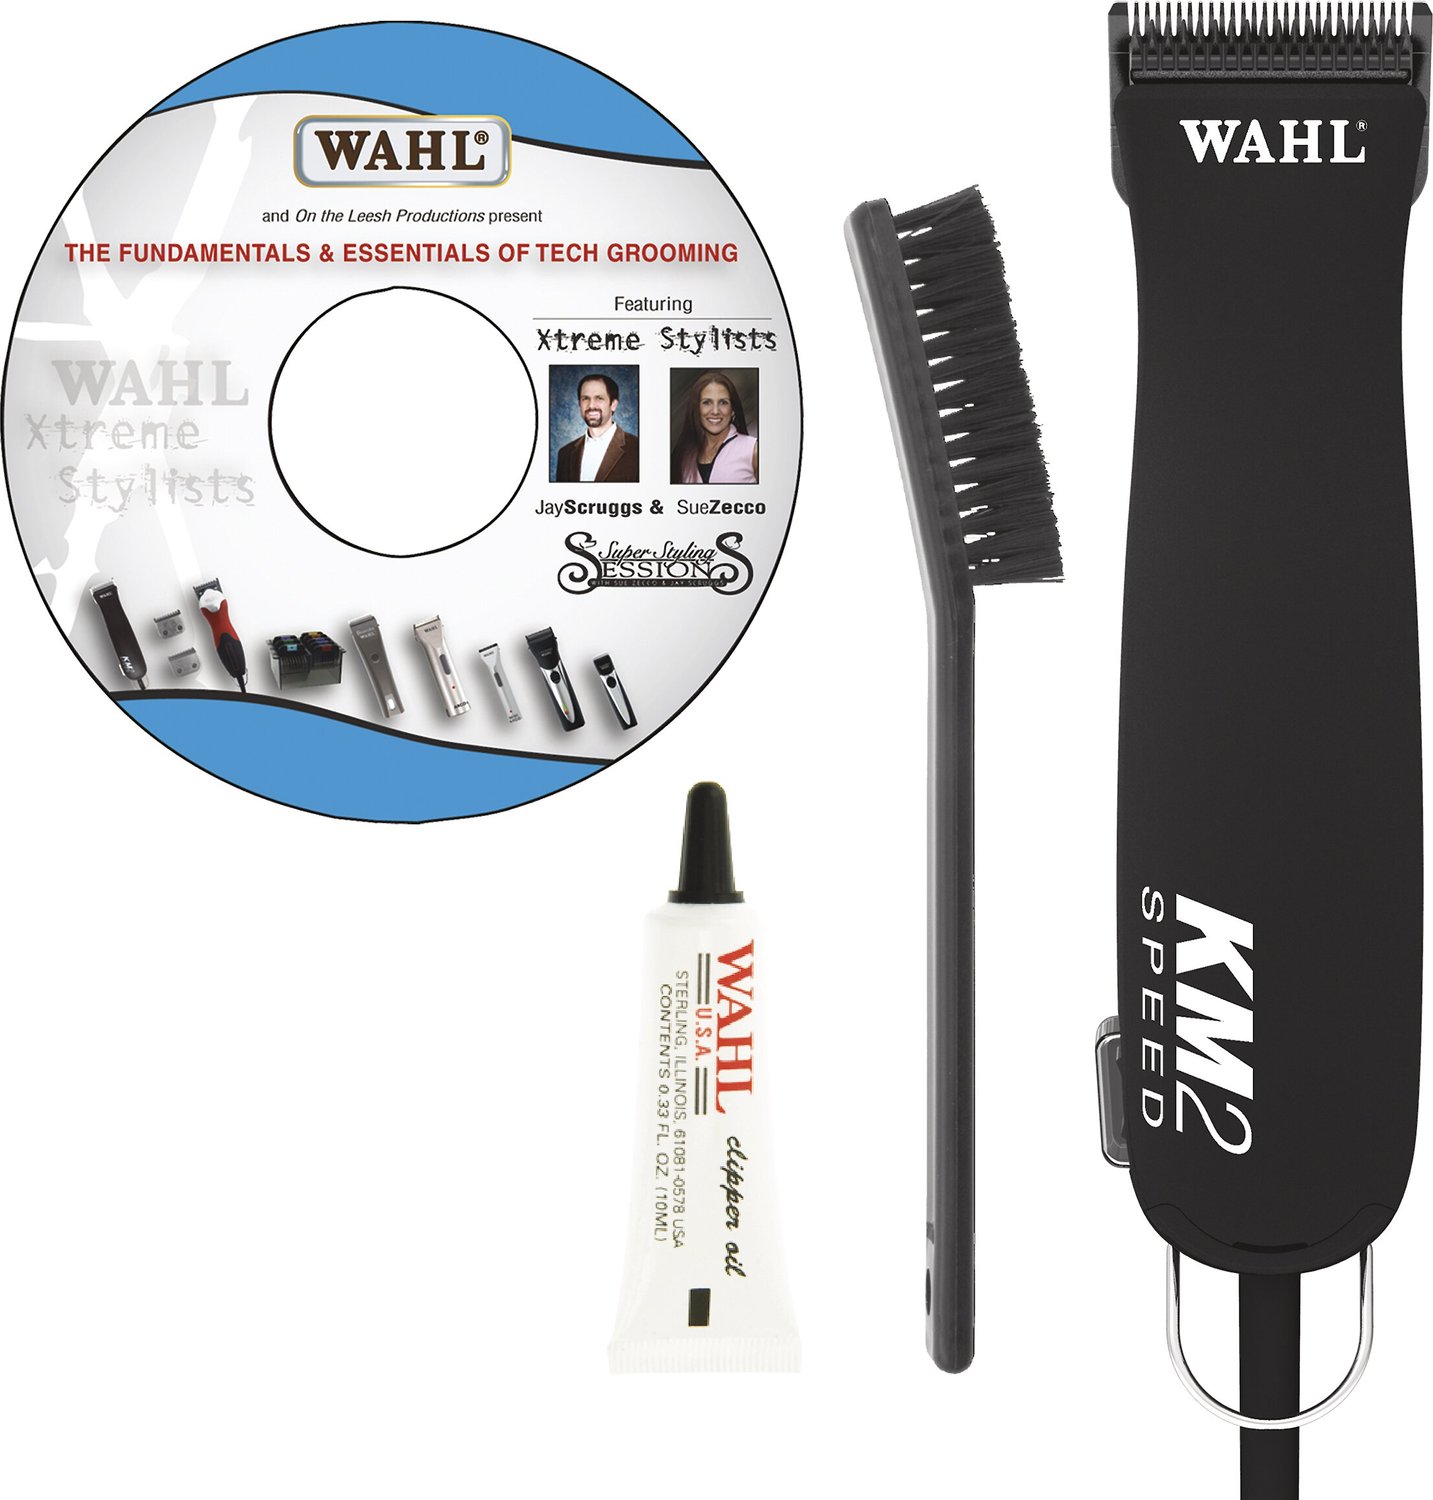 wahl km2 dog clippers